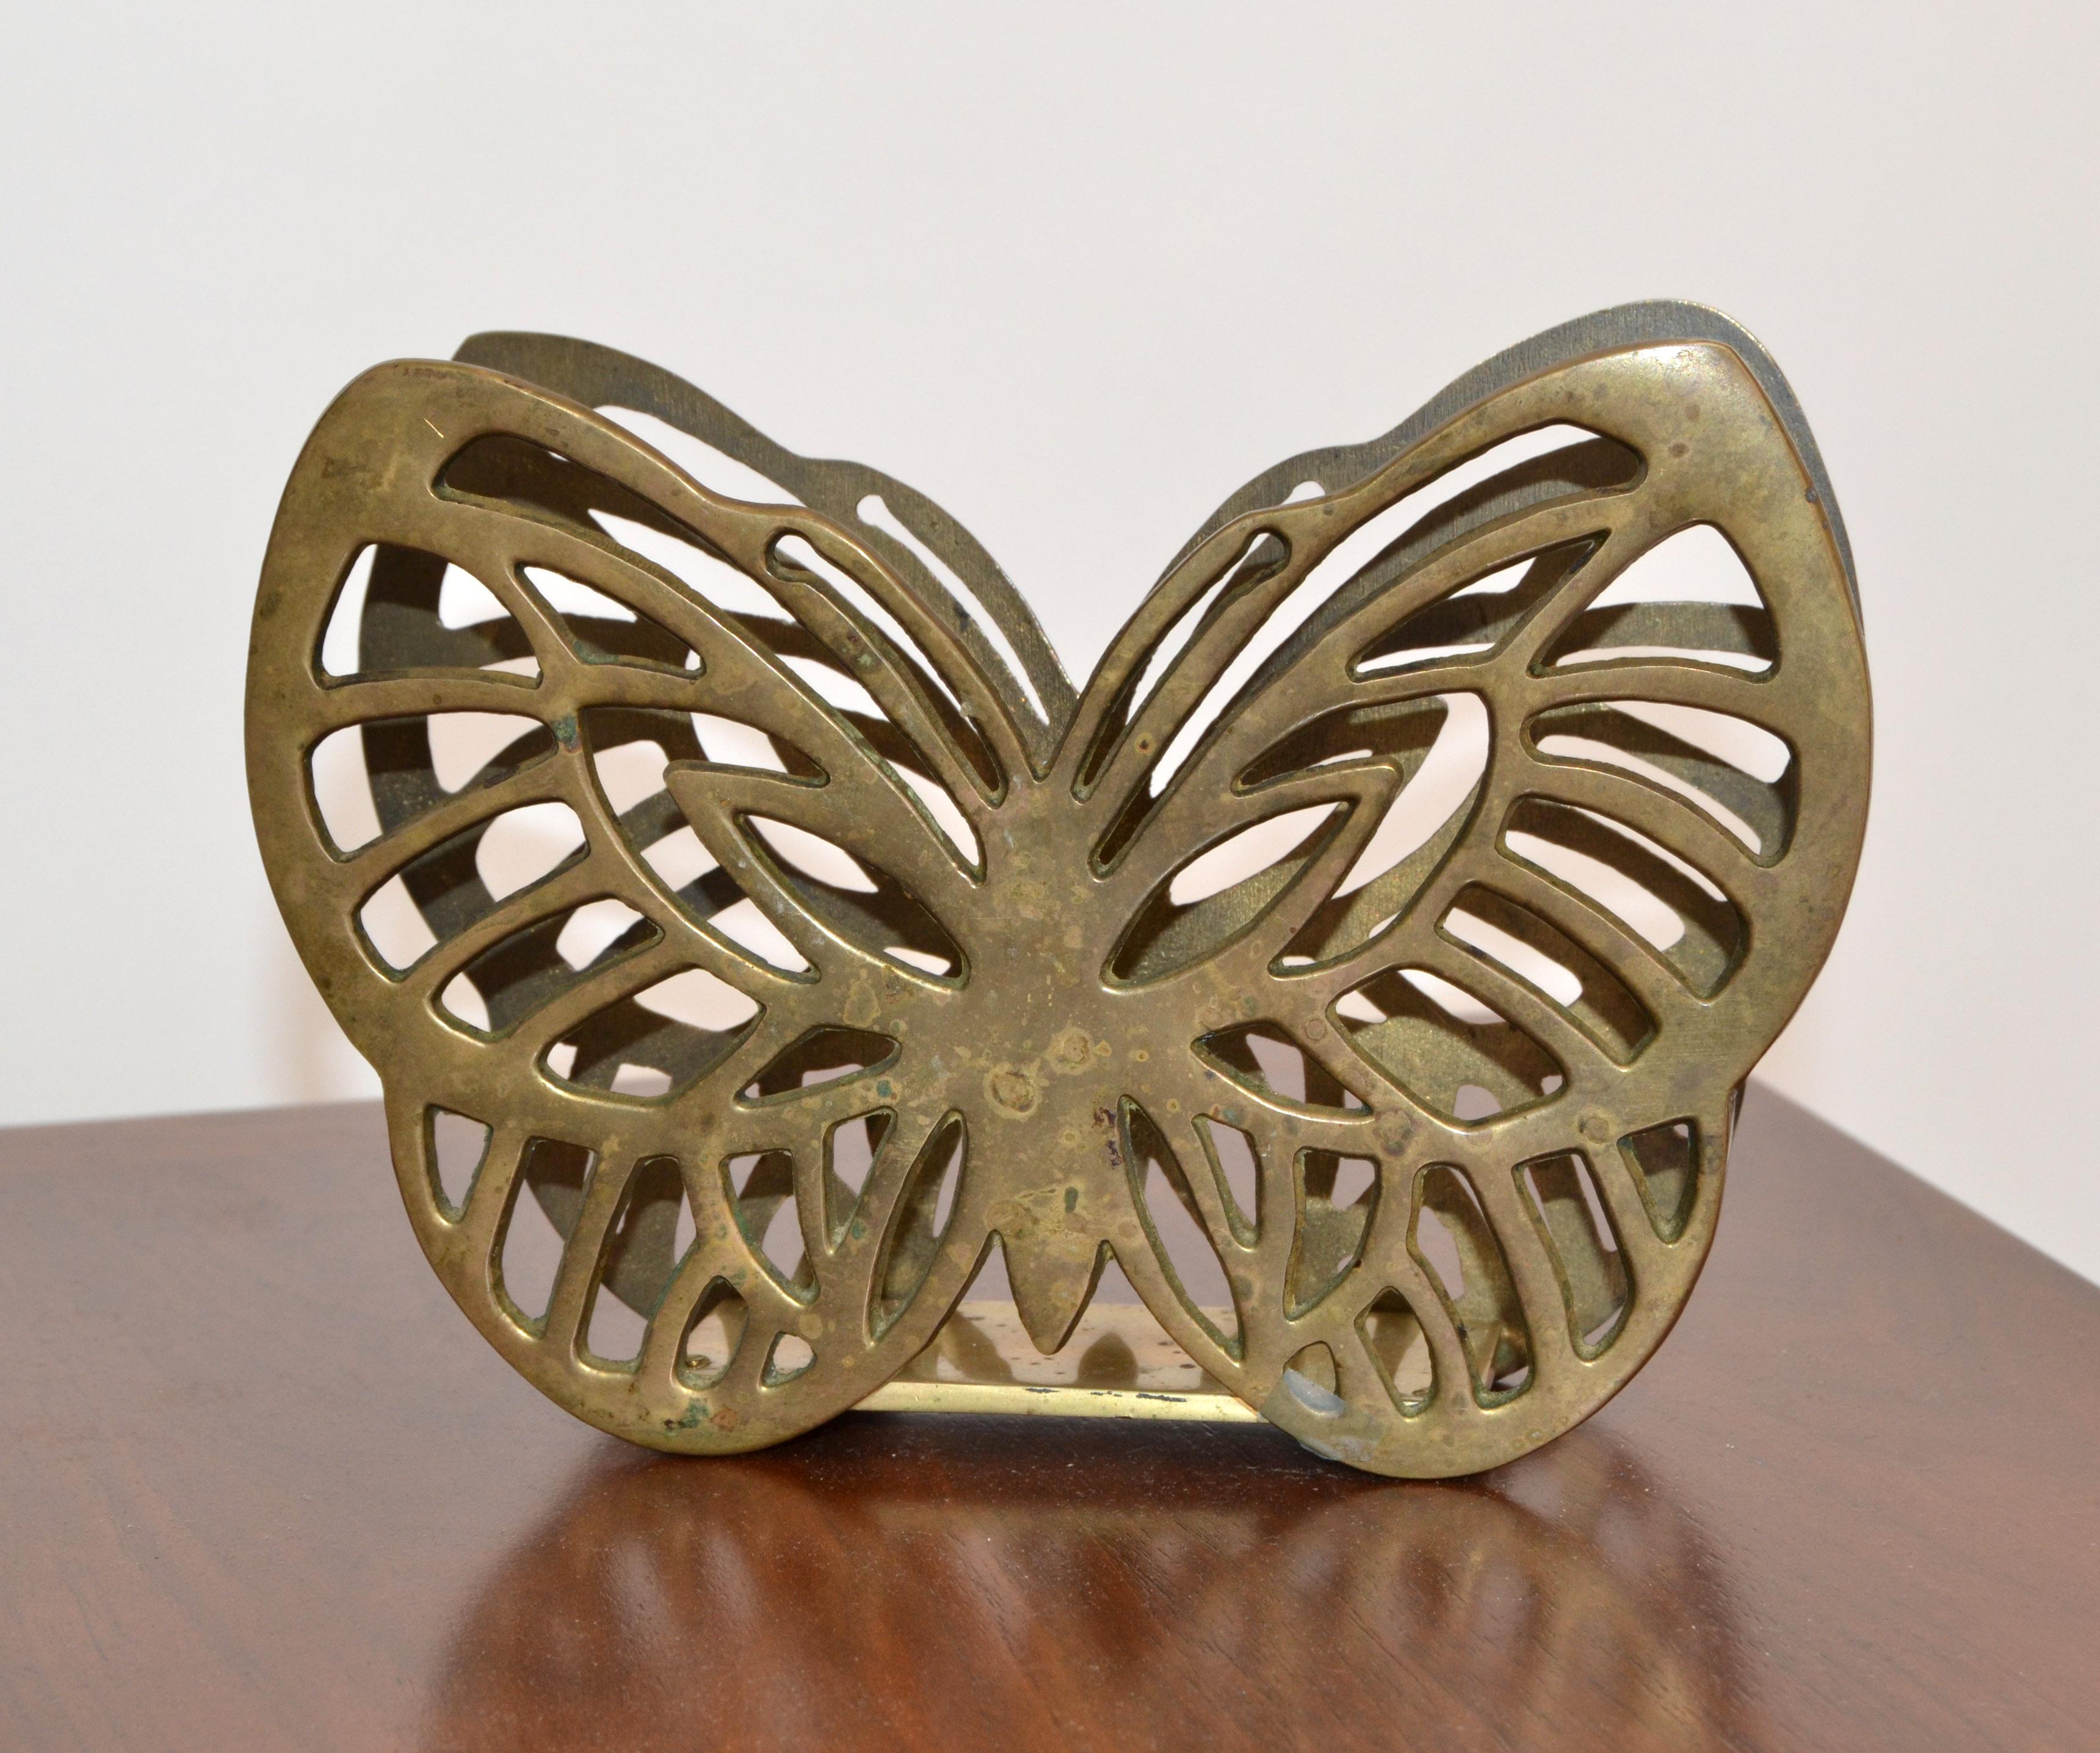 Hollywood Regency Asian Inspired Handcrafted brass butterfly napkin holder, kitchen accessories, tableware. 
Makers Mark at the Base.
Charming Animal Sculpture for Your festive Family Table Setting.
In original vintage condition with patina to